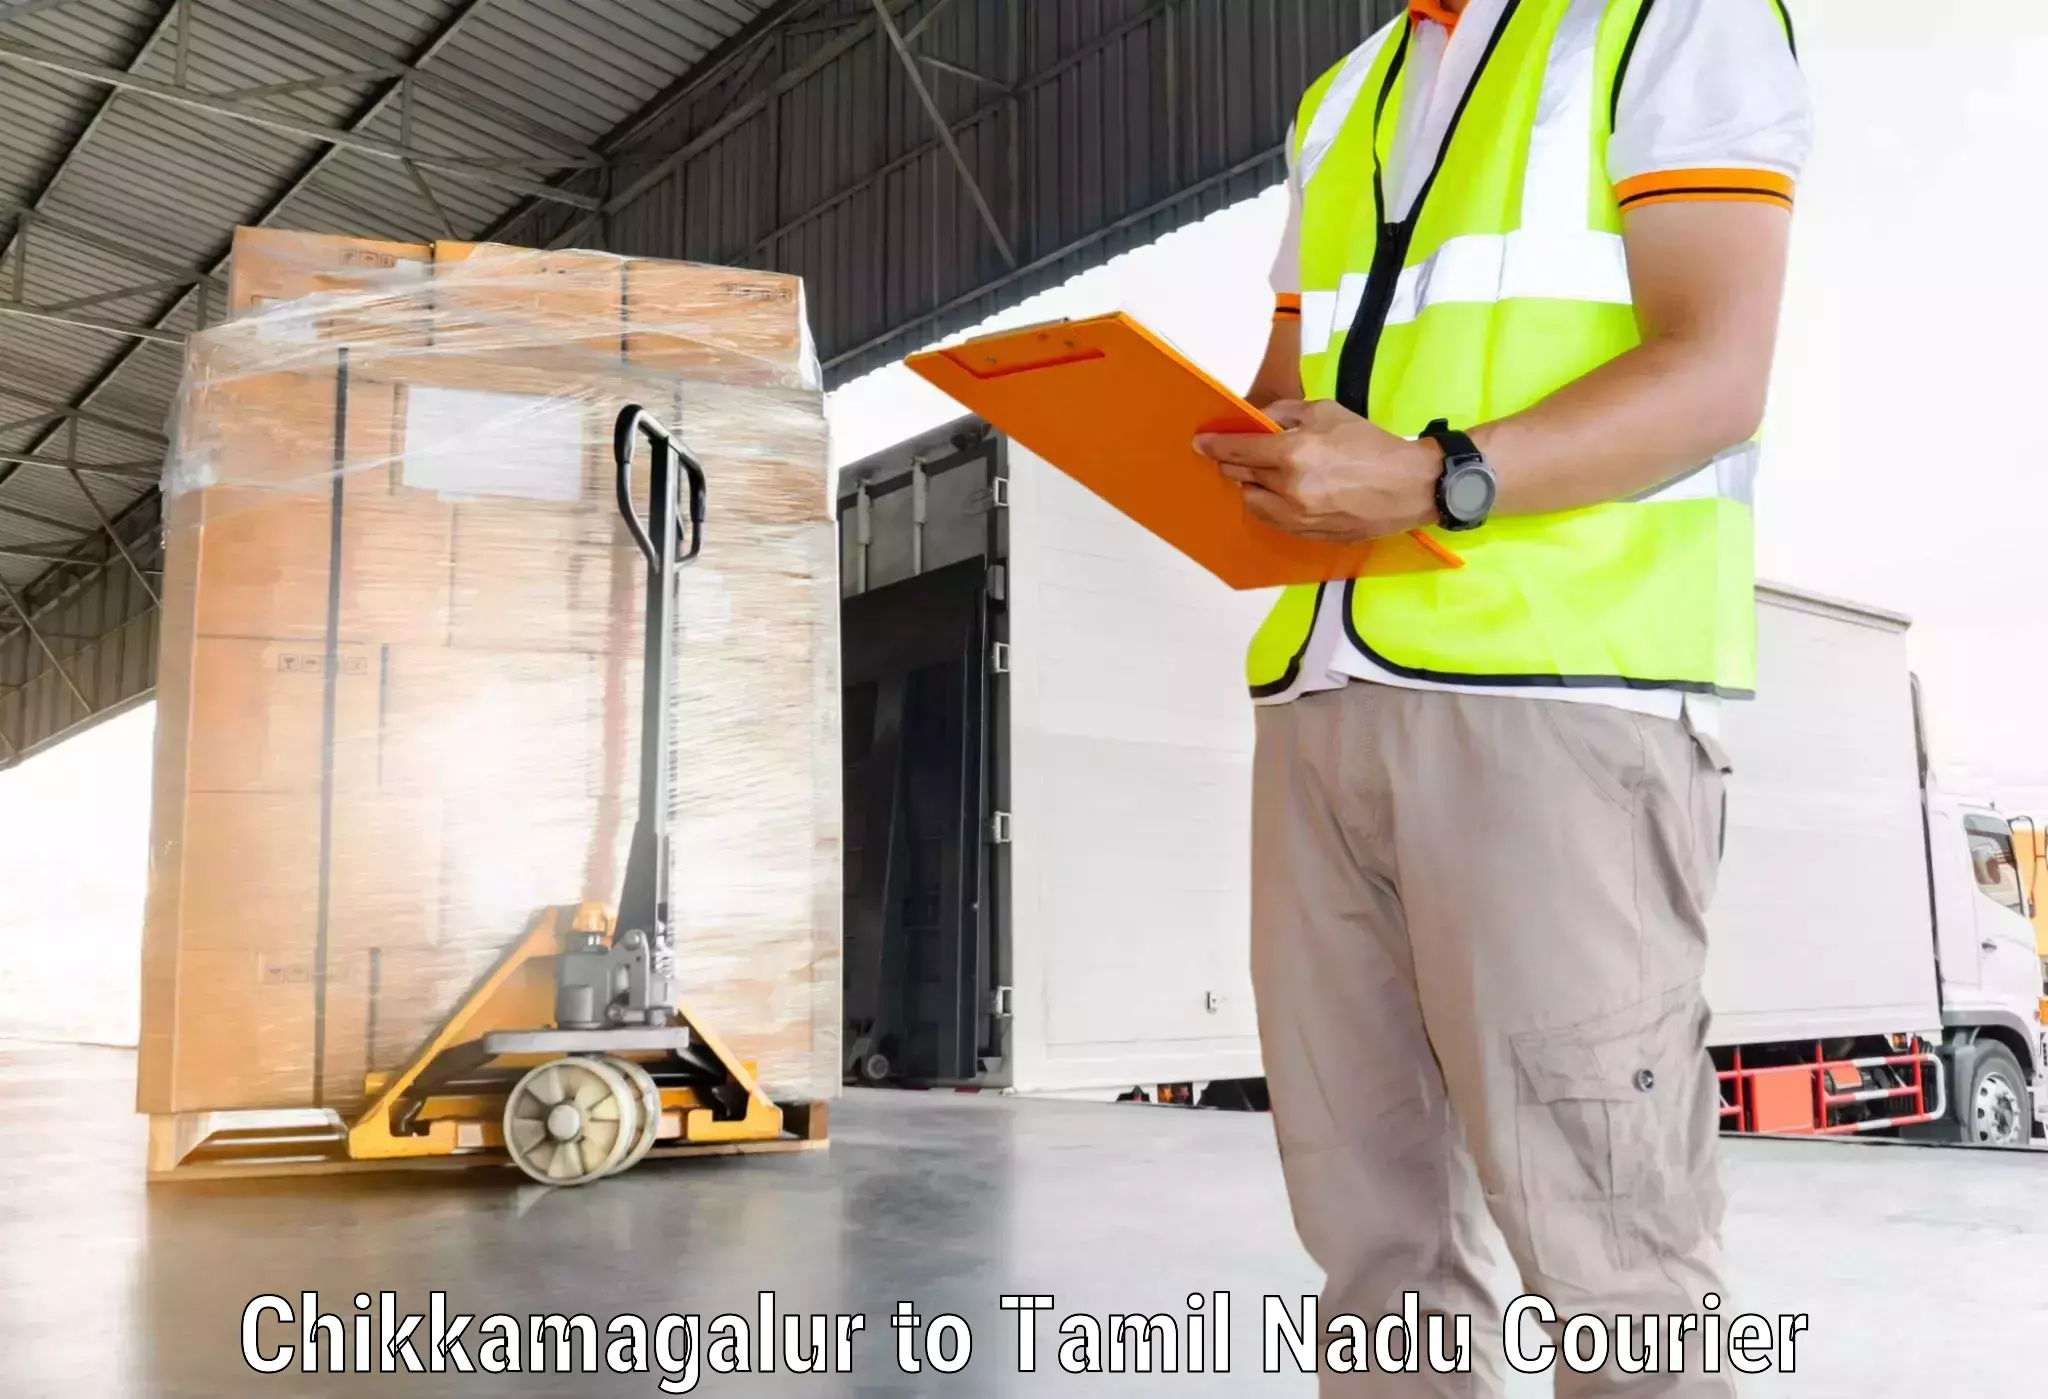 Special handling courier Chikkamagalur to Meenakshi Academy of Higher Education and Research Chennai